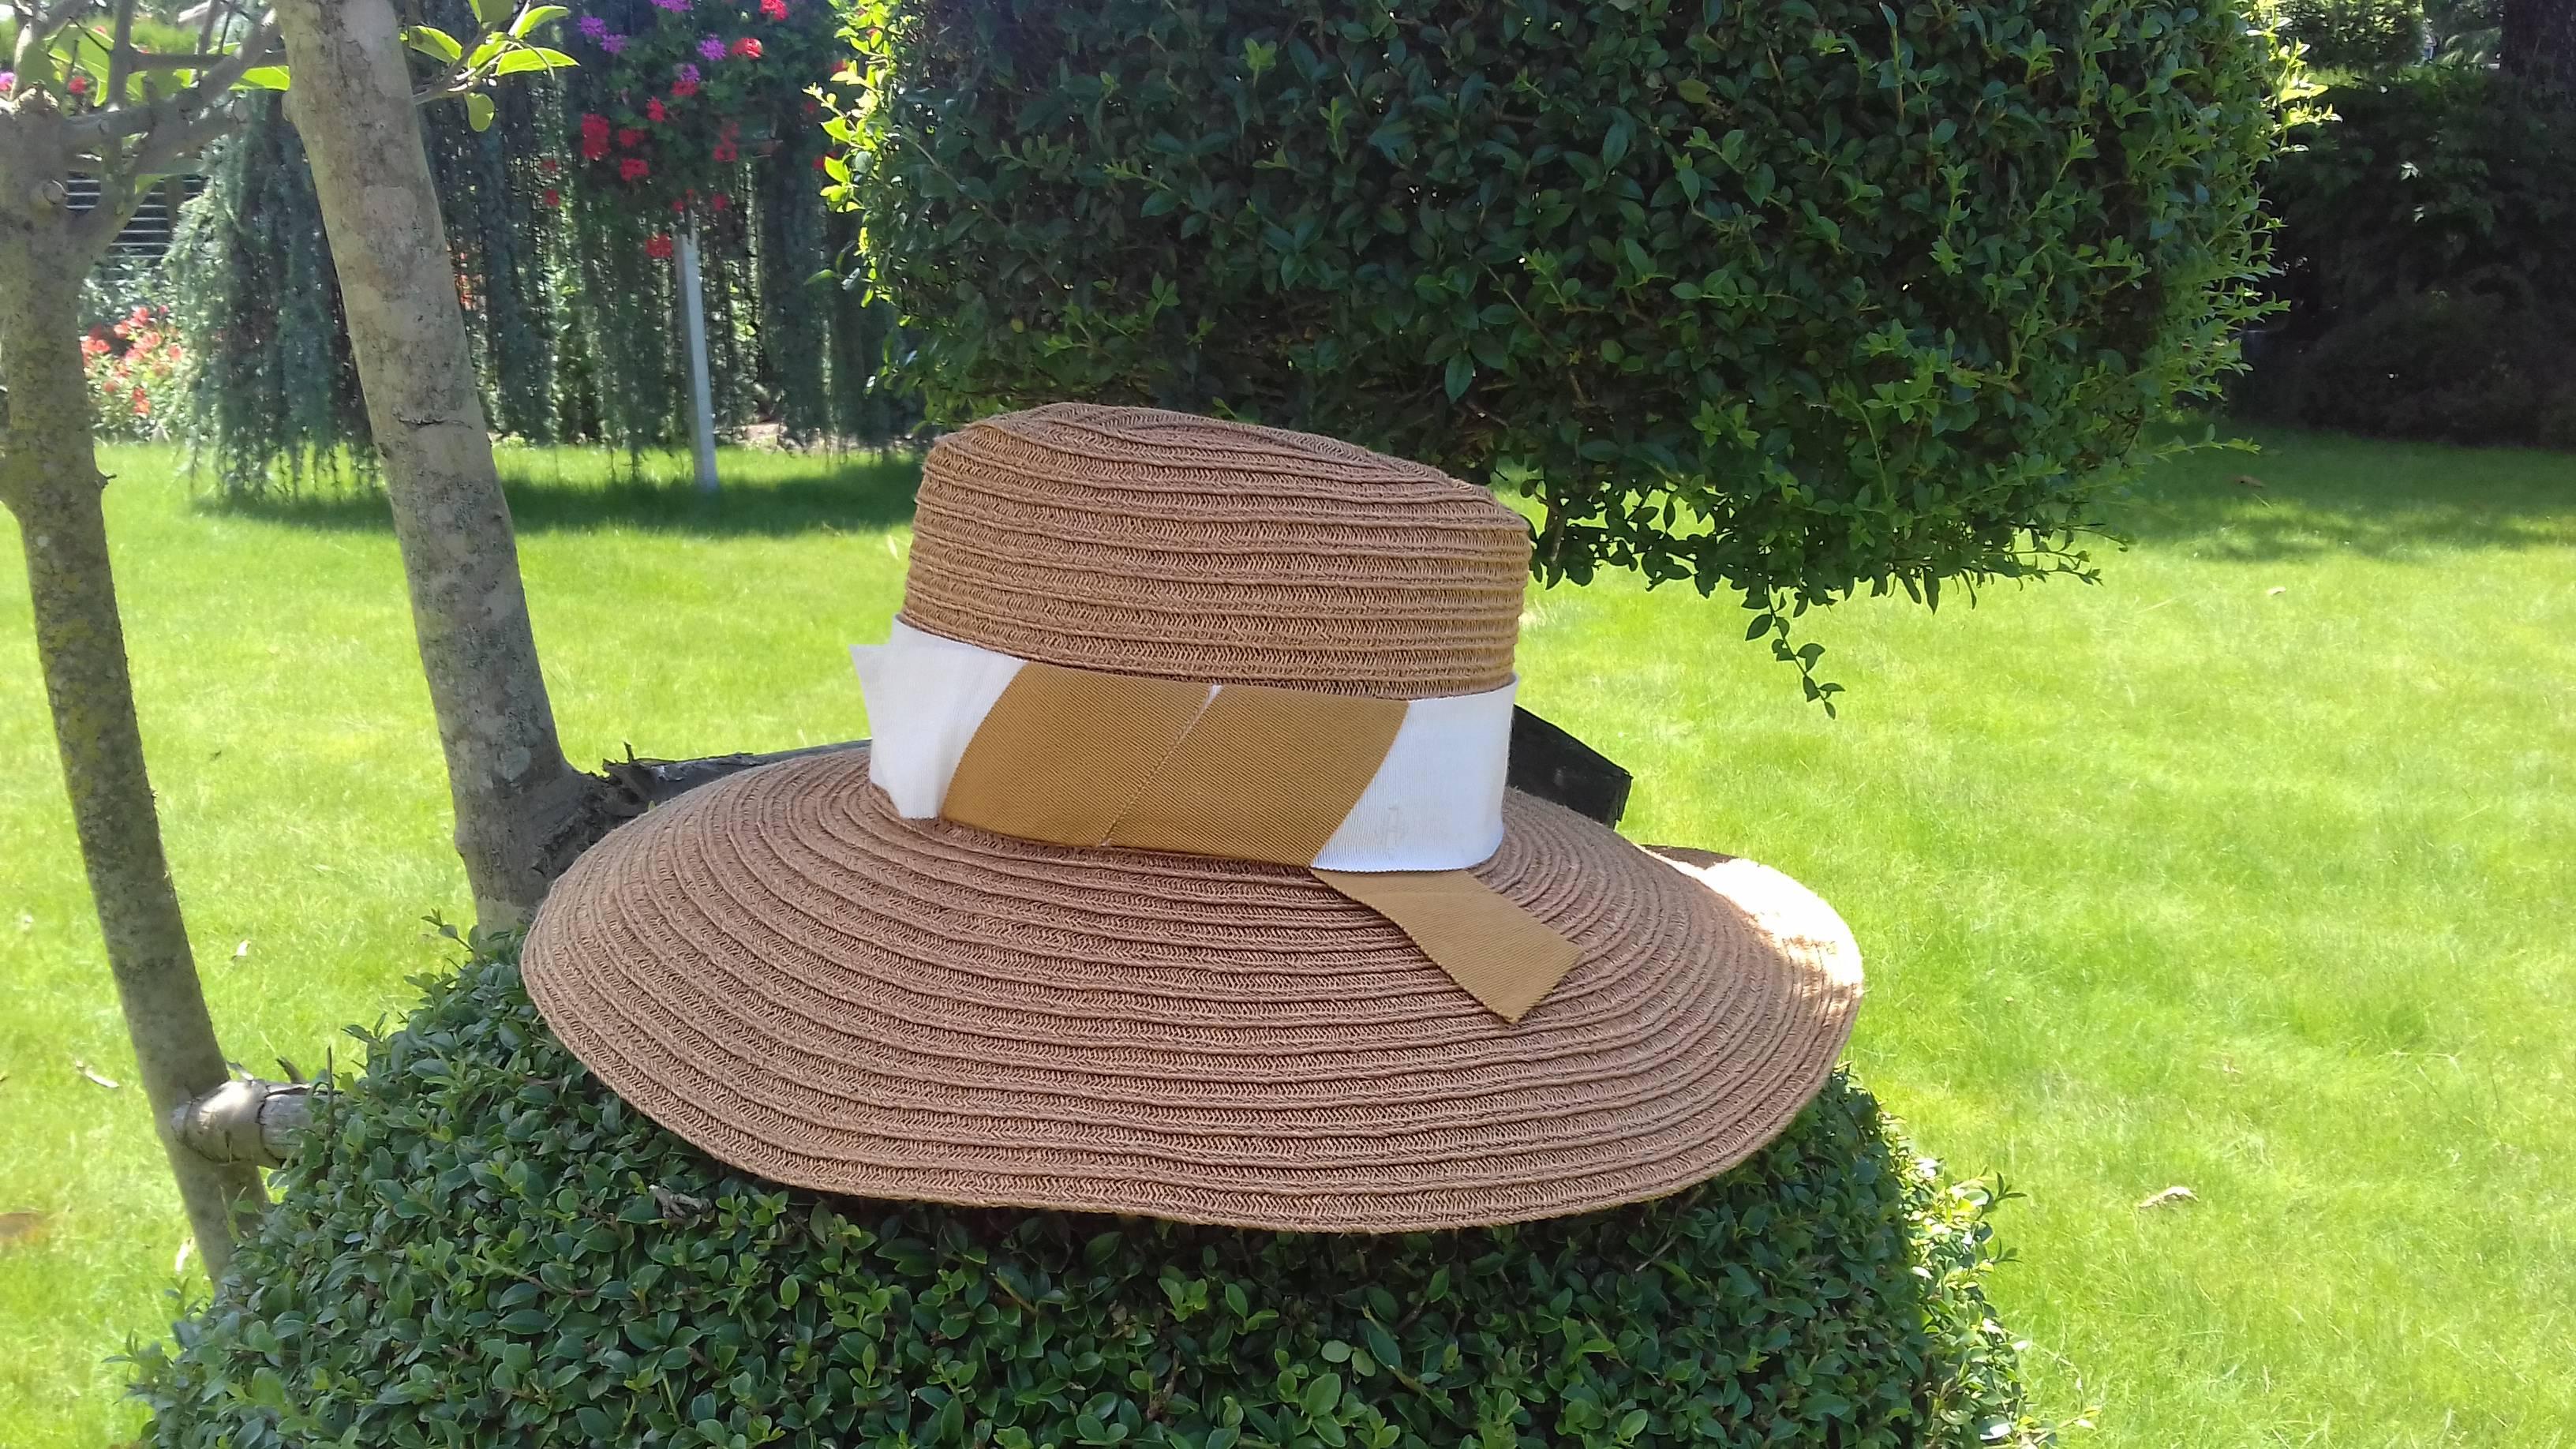 Beautiful Authentic Hermès Sun Hat

Made in Italy

Made of 100% Hemp (Chanvre)

Trimming made of 56% Coton and 44% Viscose

Colorways: Beige 

Decorated with a Ivory and Beige Fabric Band

An 